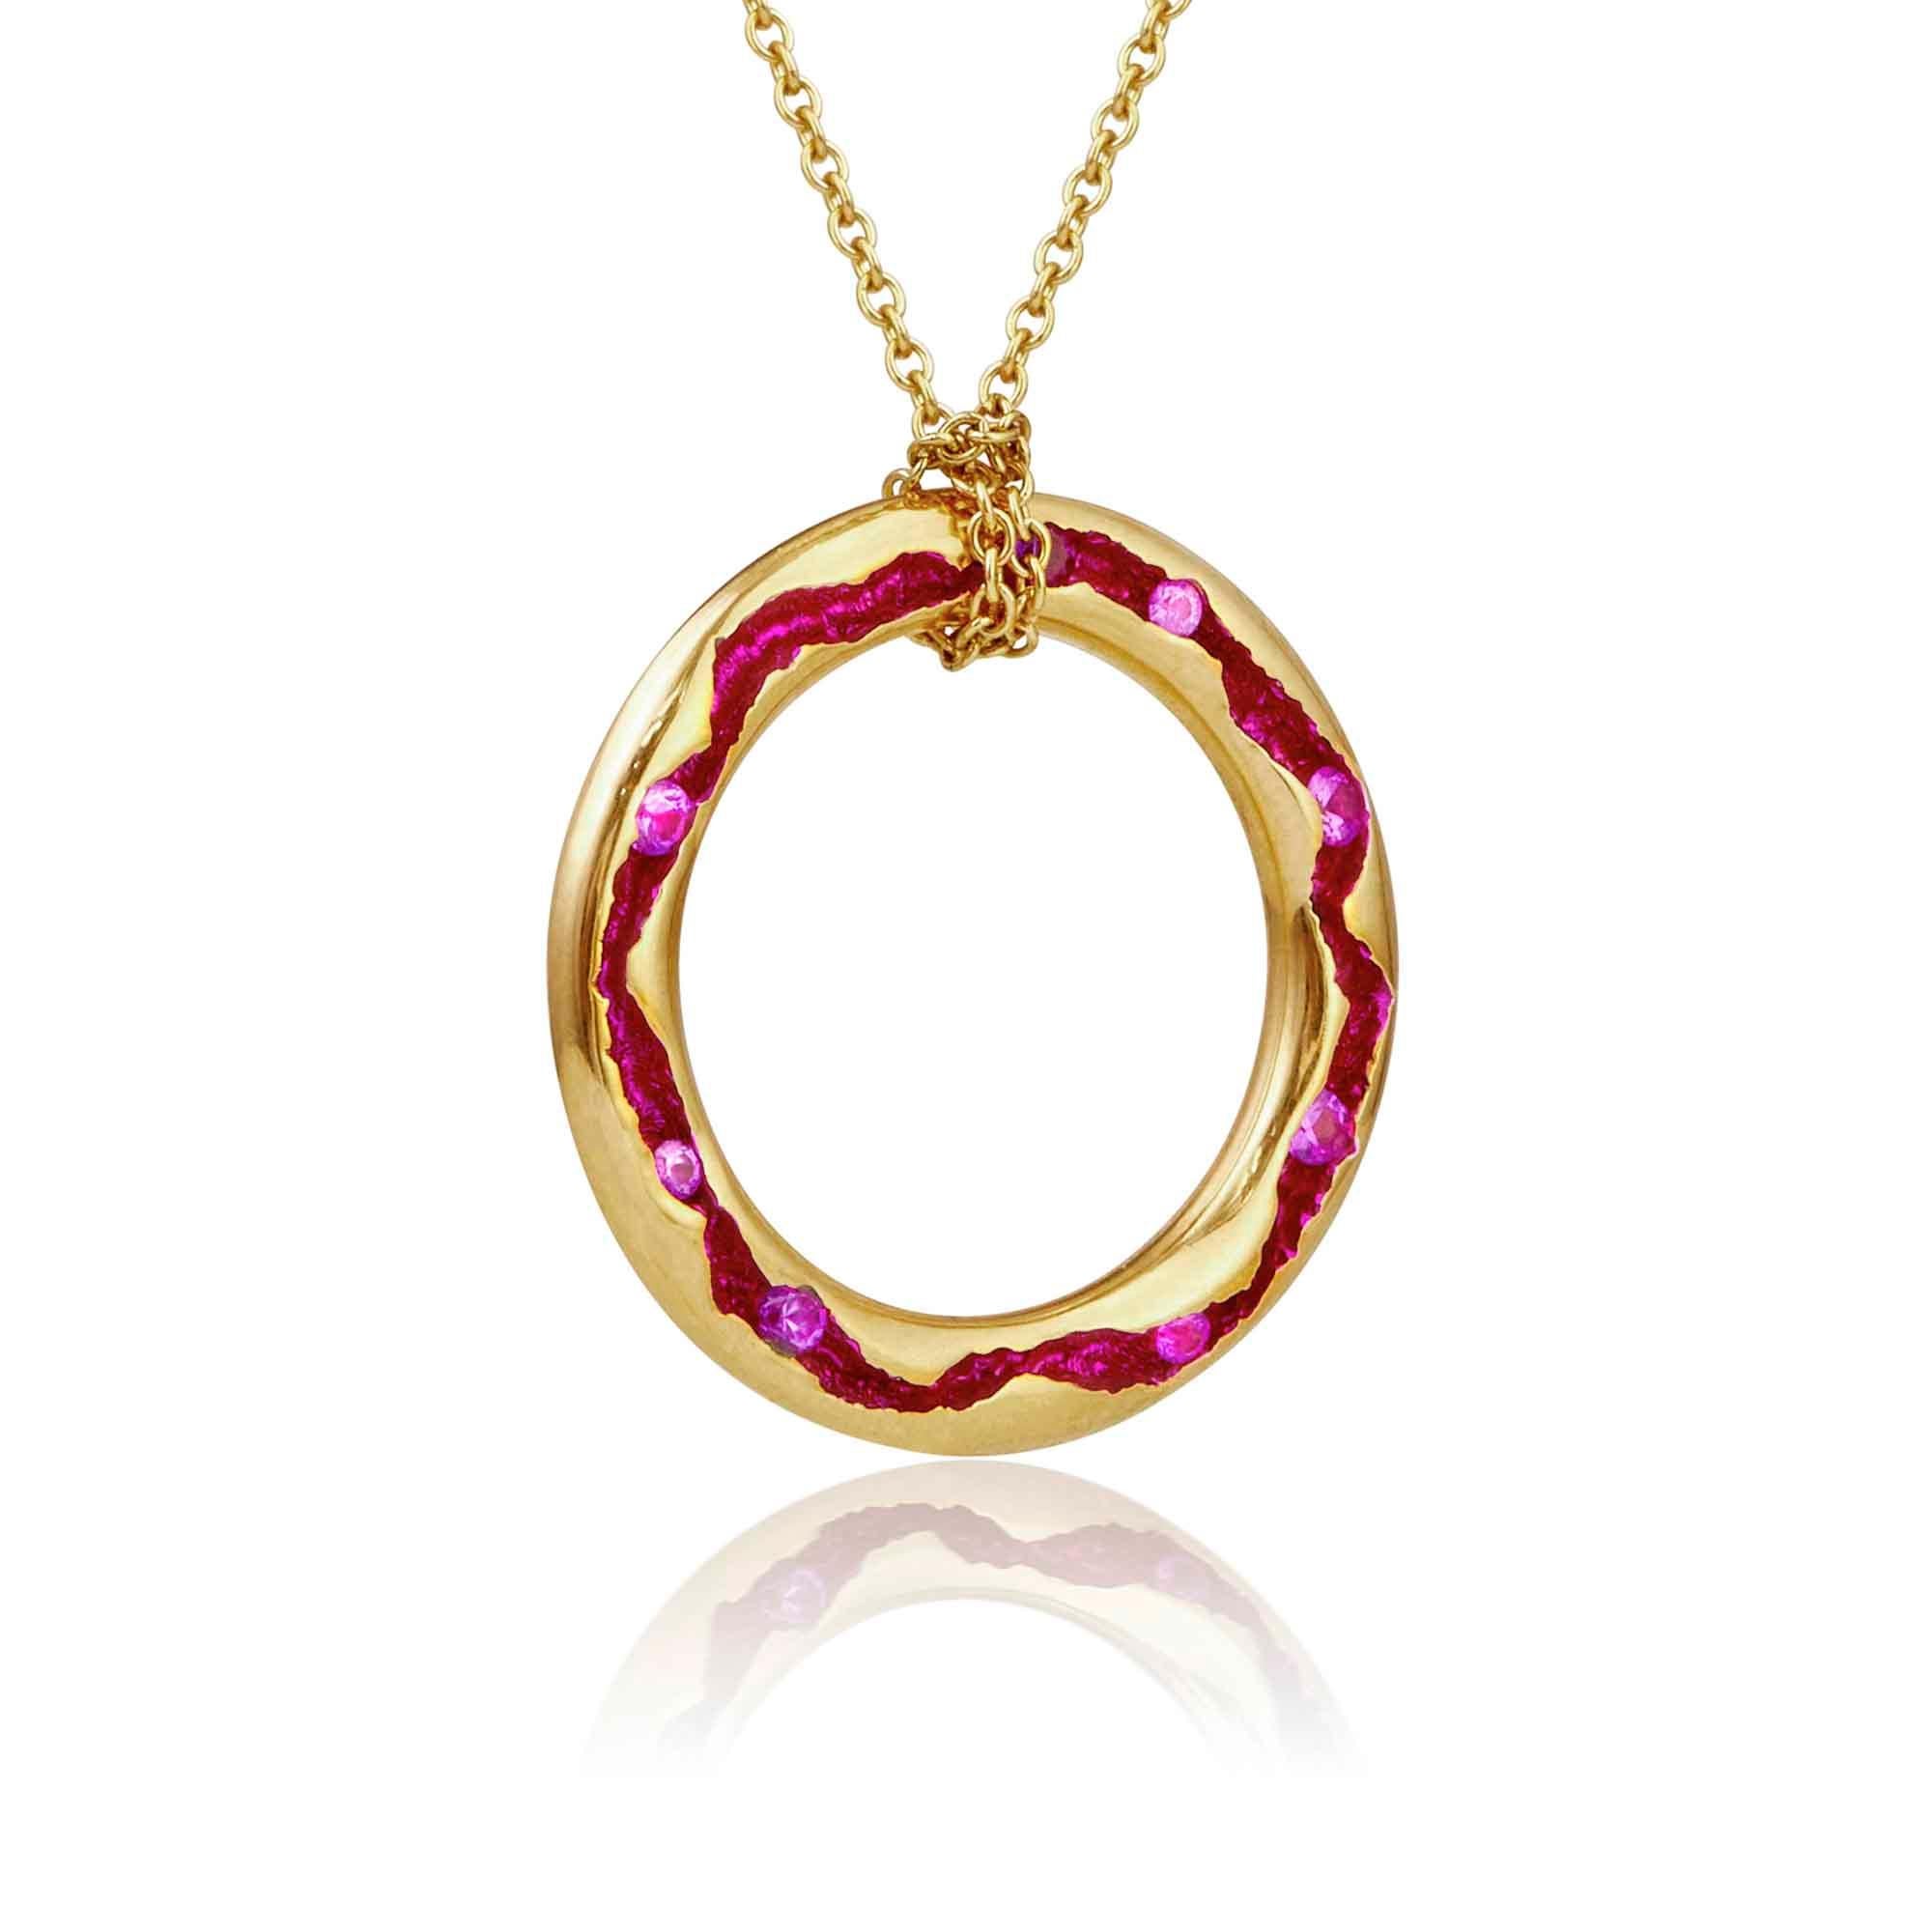 Experience the exhilarating burst of joy that comes with a splash of color! Prepare to have your day transformed by the radiant charm of this magnificent, larger-than-life necklace, boasting a captivating hue of vibrant pink. Its simple yet striking